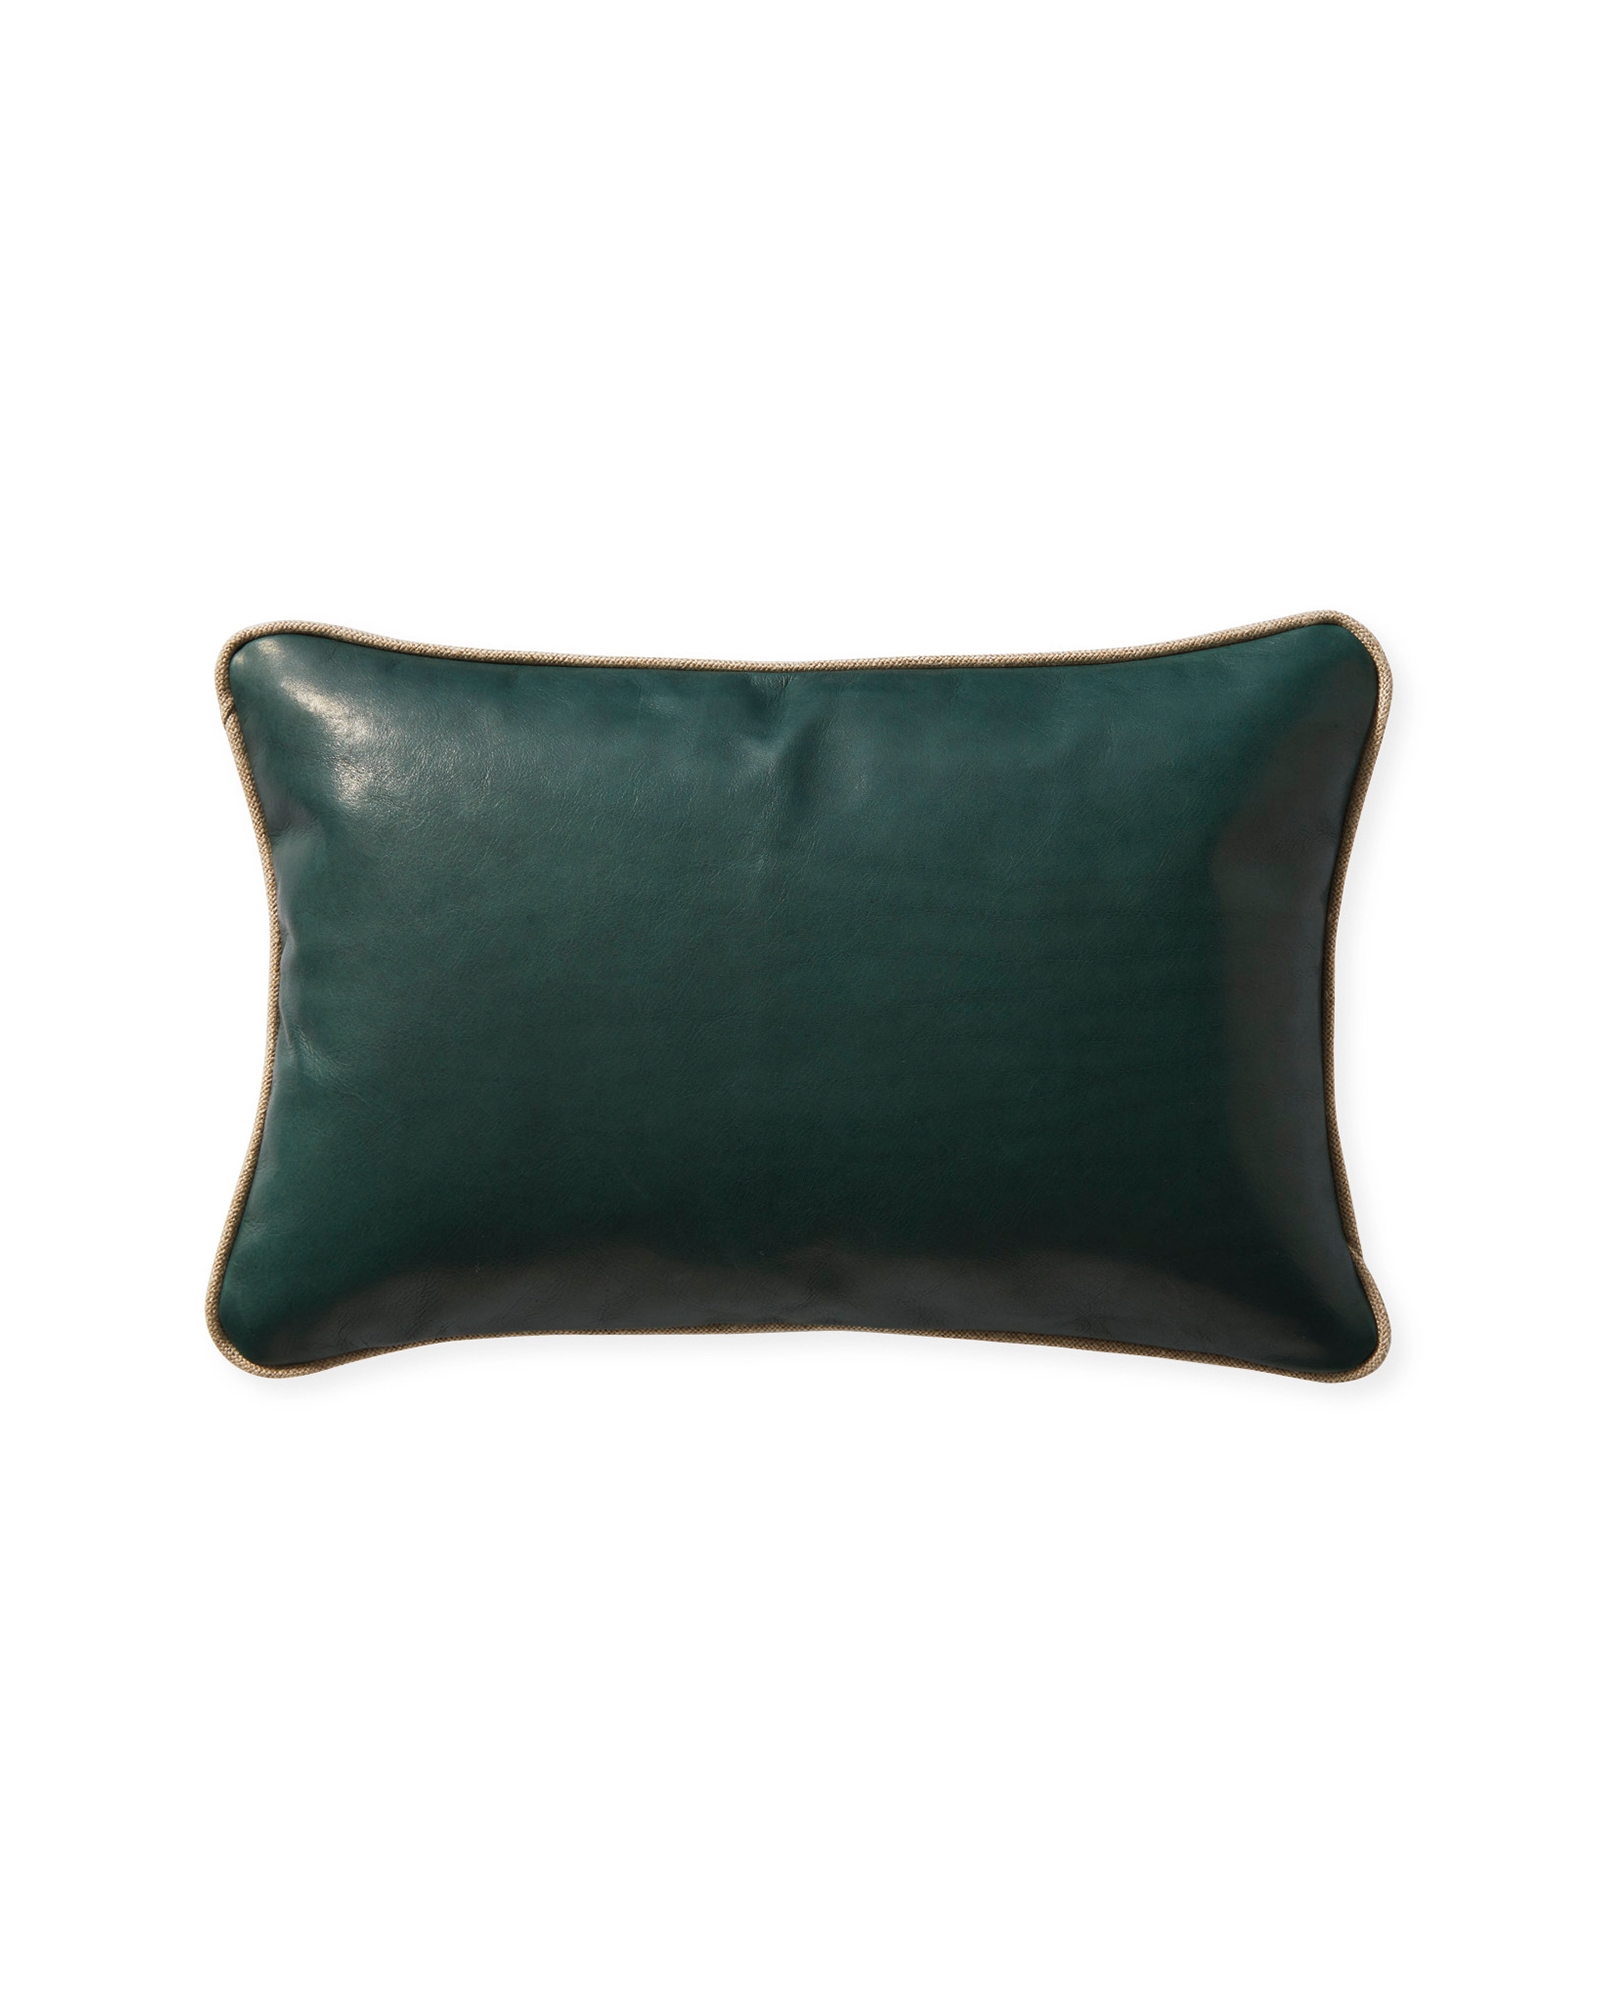 Leather 12" x 18" Pillow Cover - Evergreen - Insert sold separately - Image 0